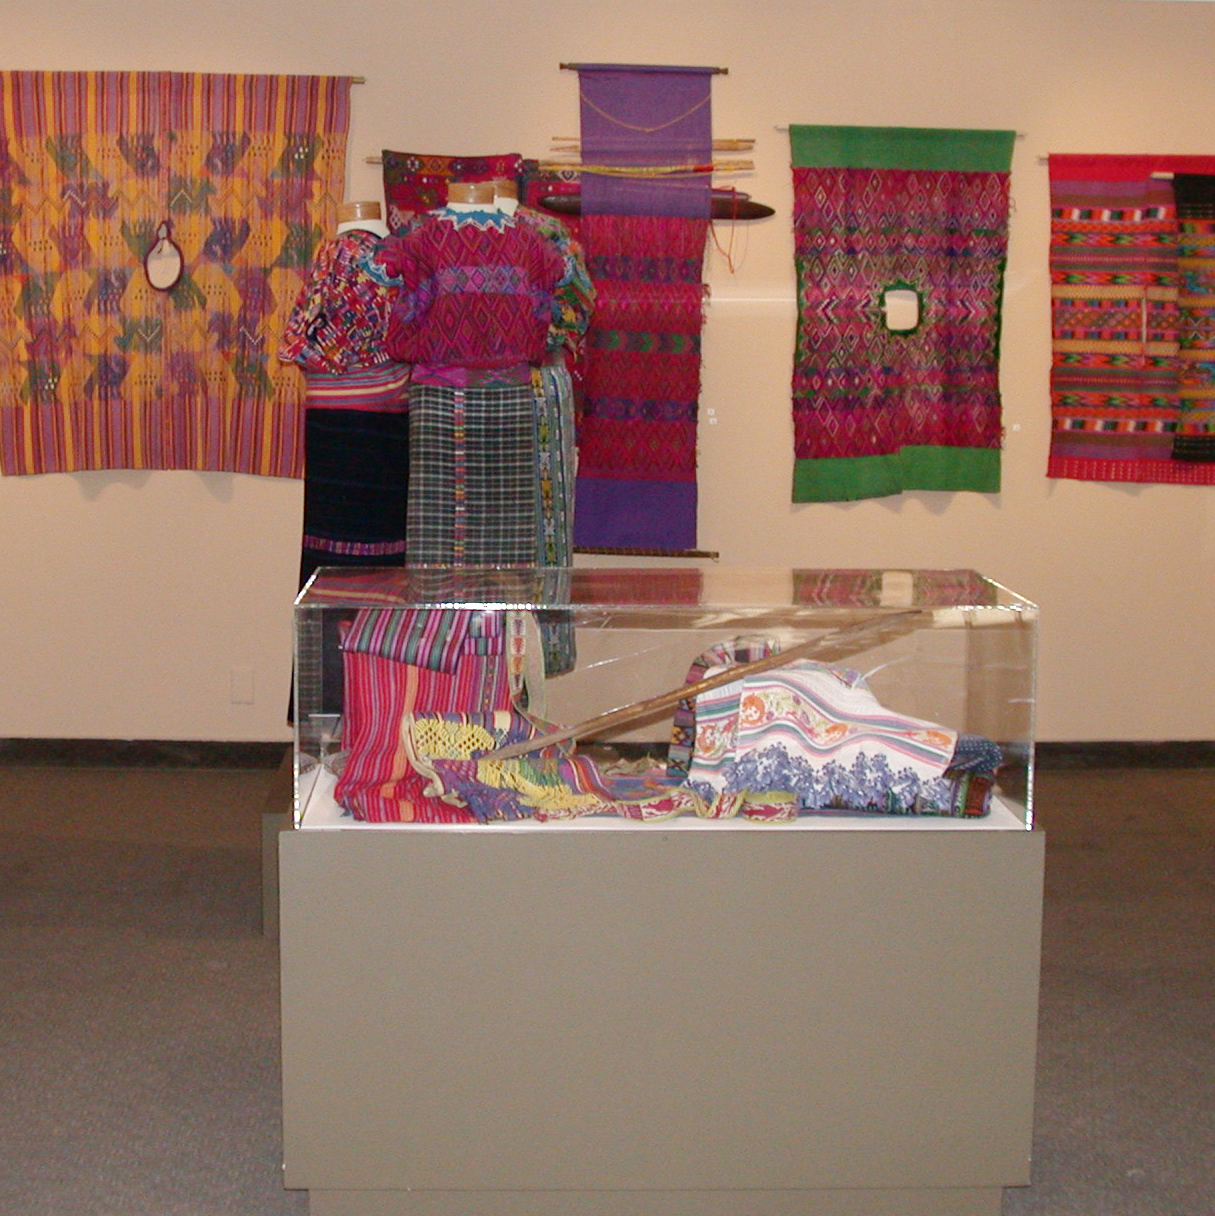 Maya Textiles From The Guatemalan Highlands textiles, photos, and clothing on display